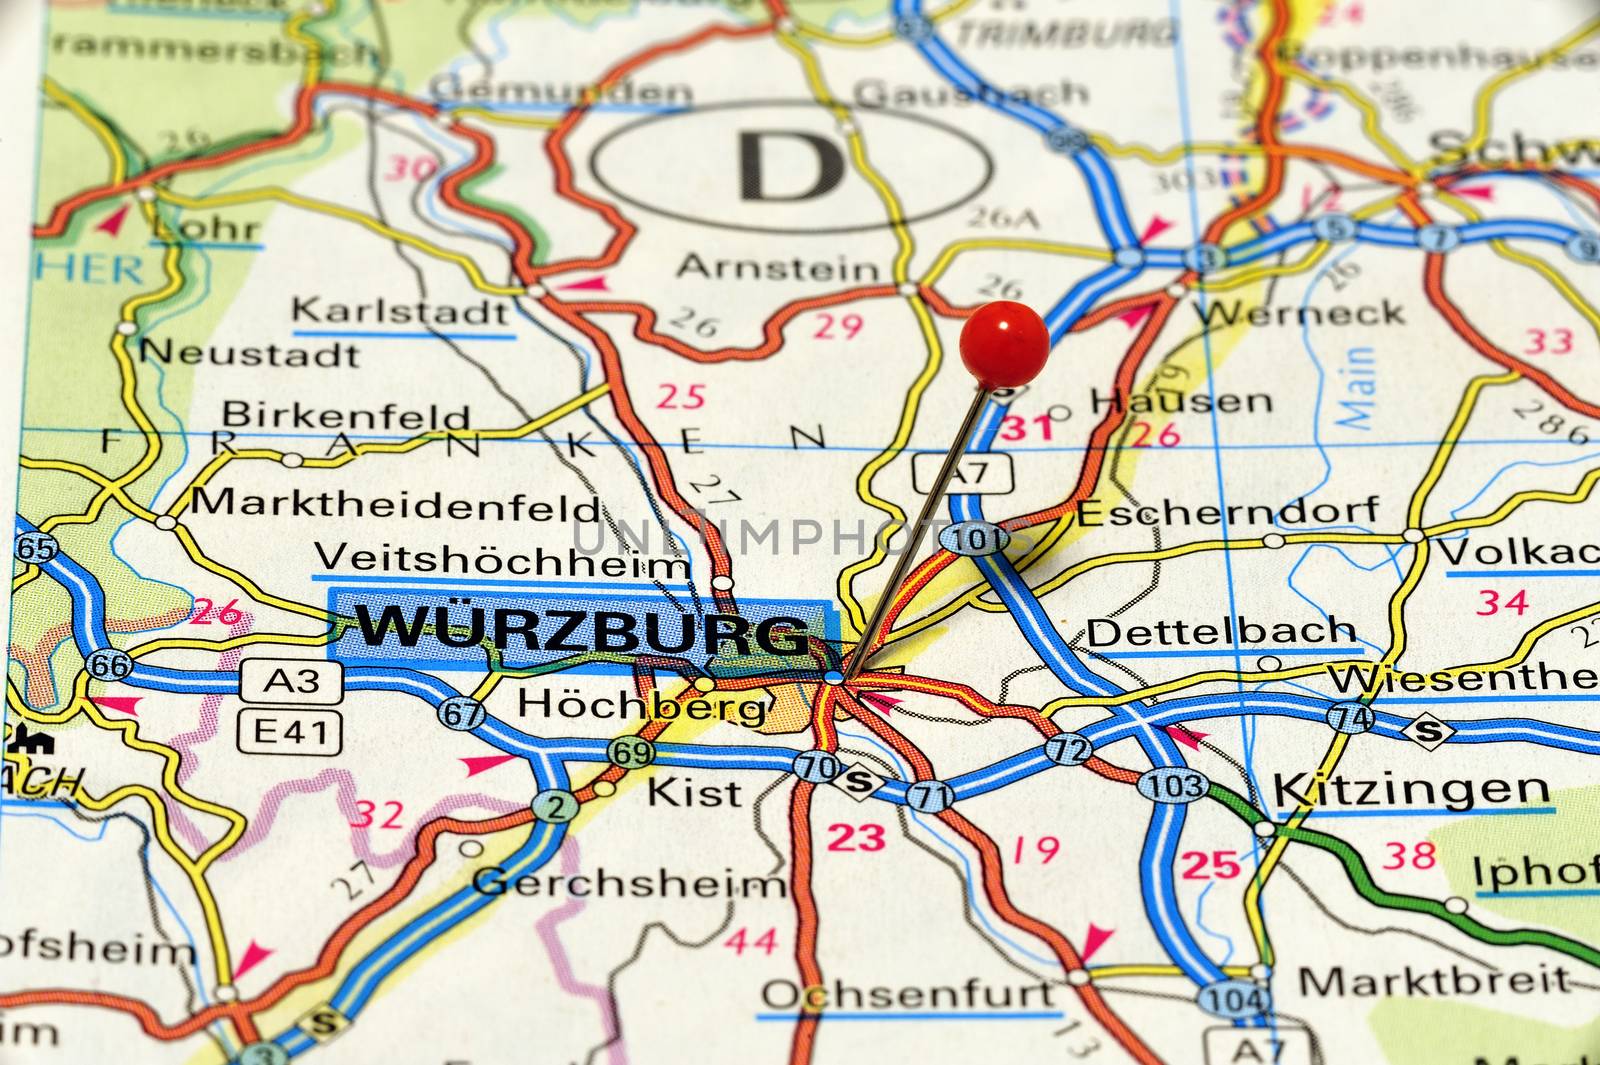 Closeup map of Würzburg a city in Germany.